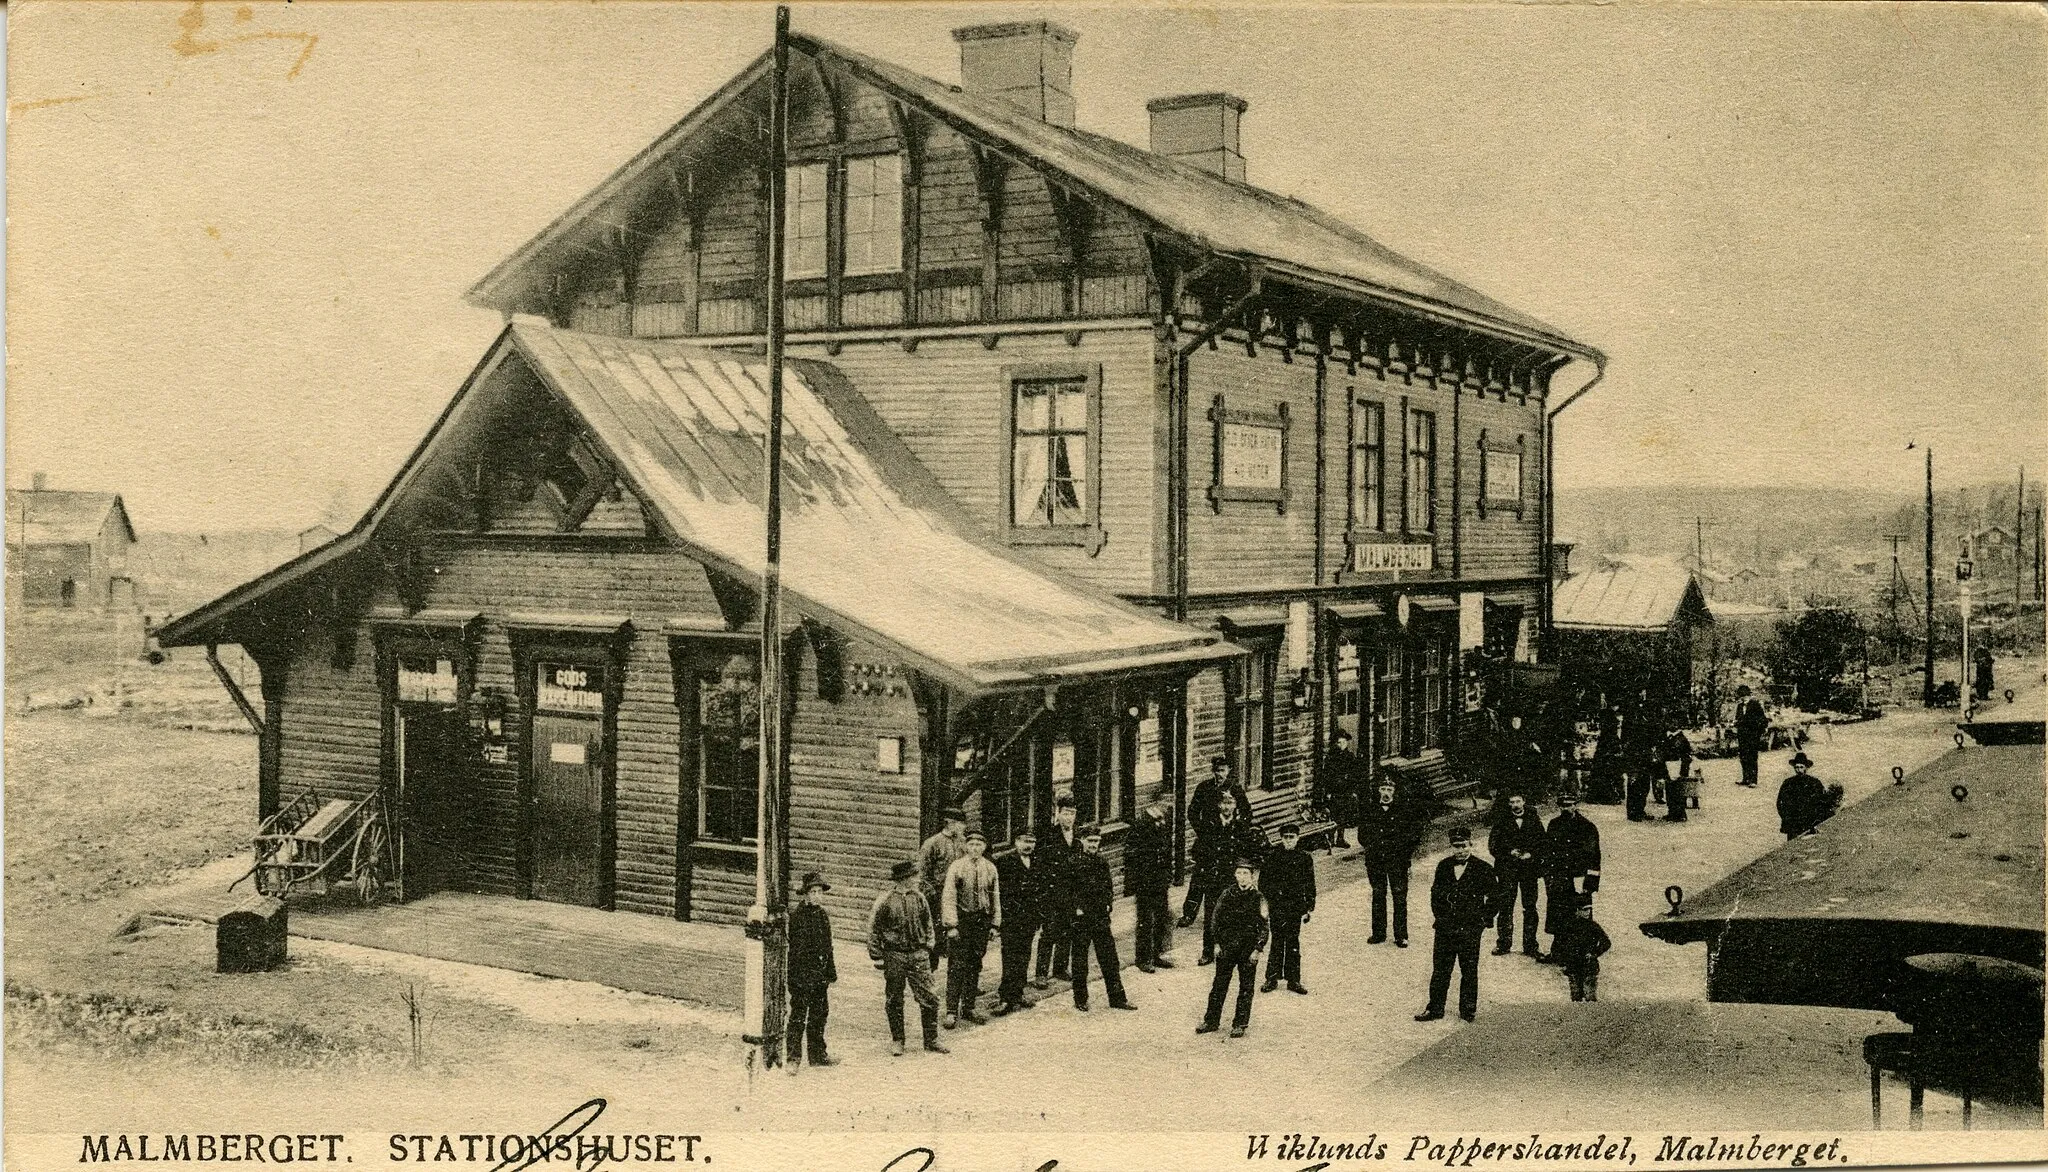 Photo showing: The train station in Malmberget